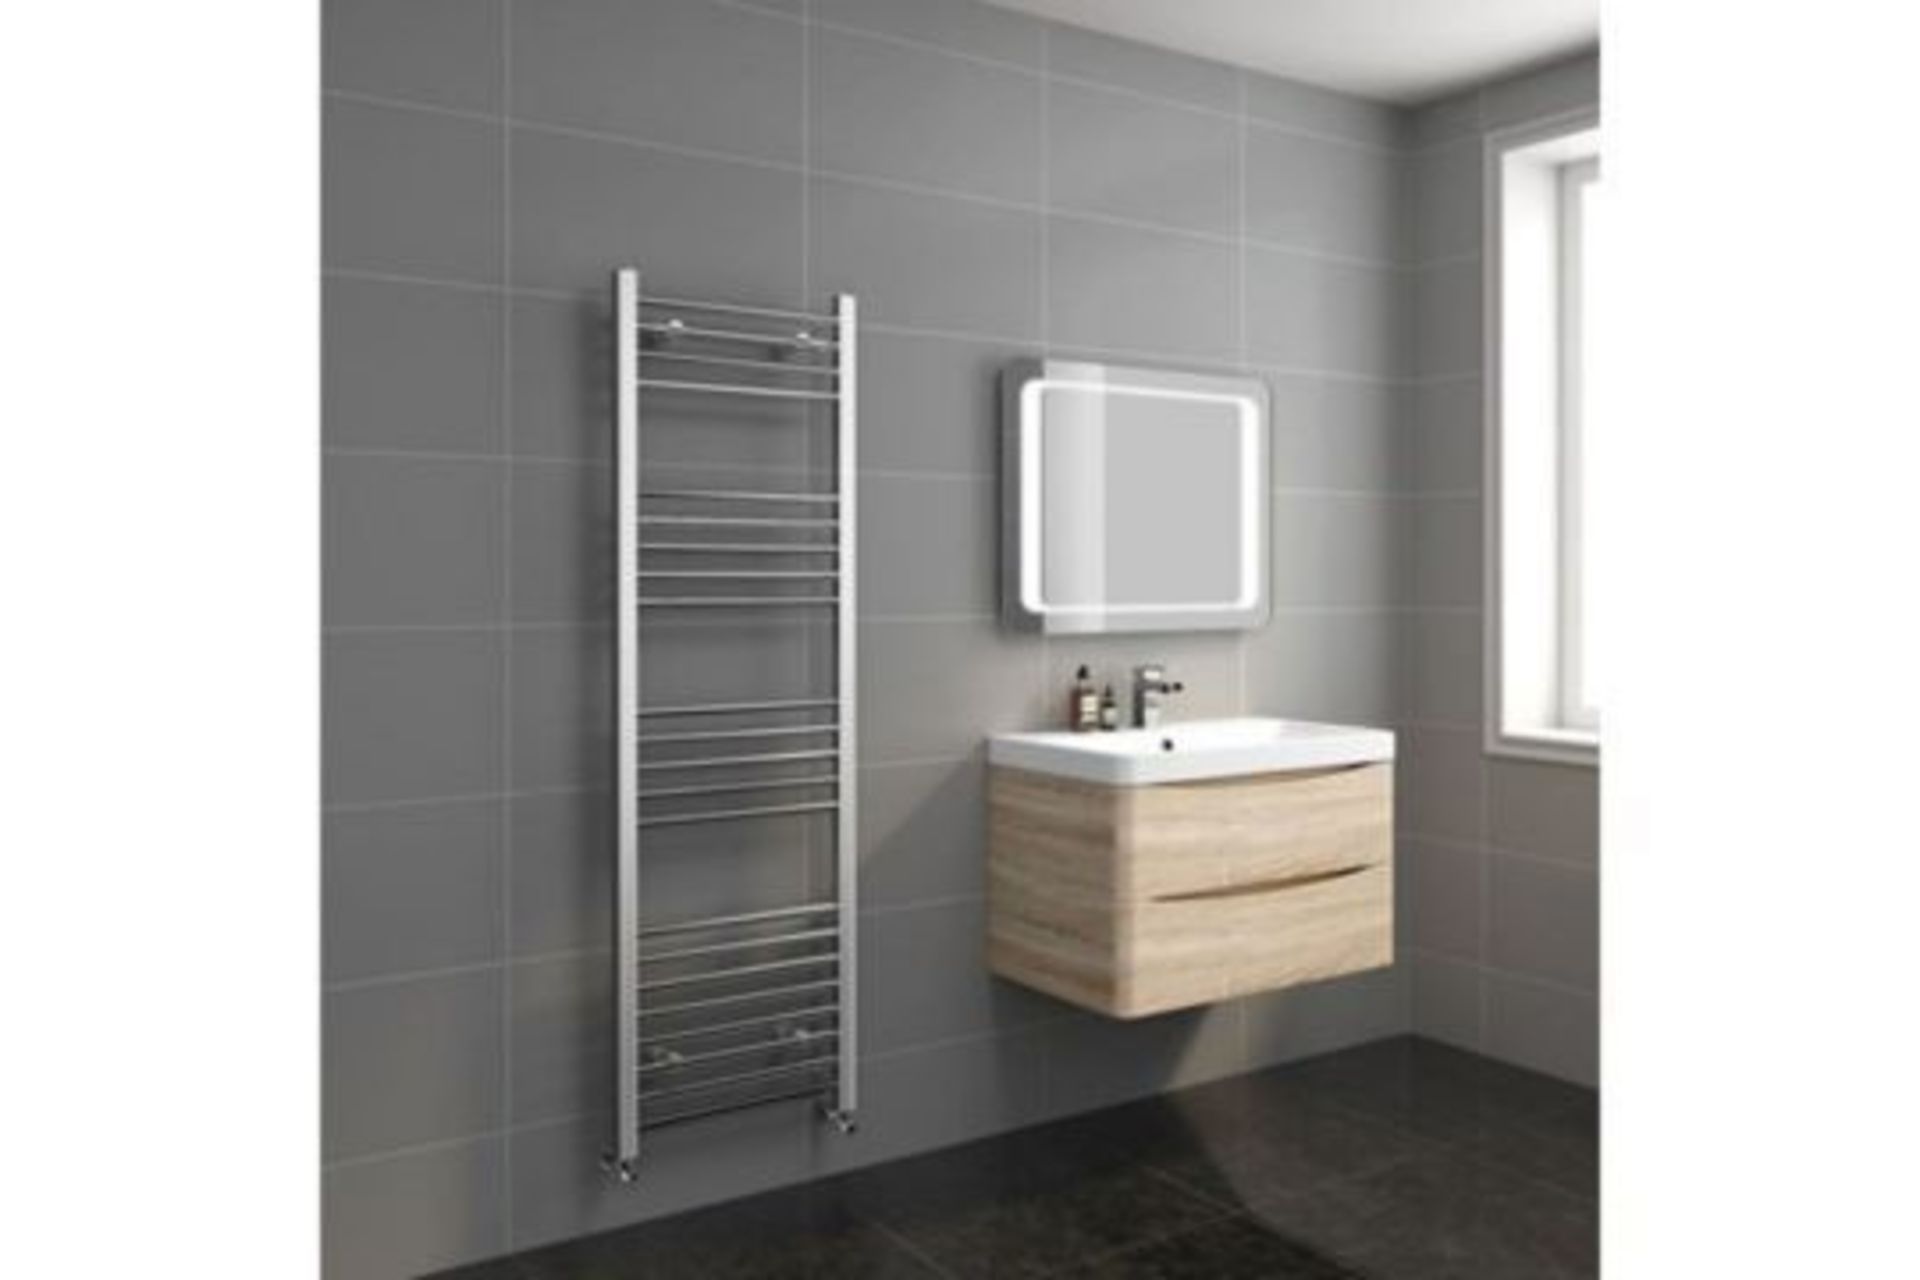 New & Boxed 1600x500 mm - 20 mm Tubes - Chrome Heated Straight Rail Ladder Towel Radiator. - Image 2 of 2